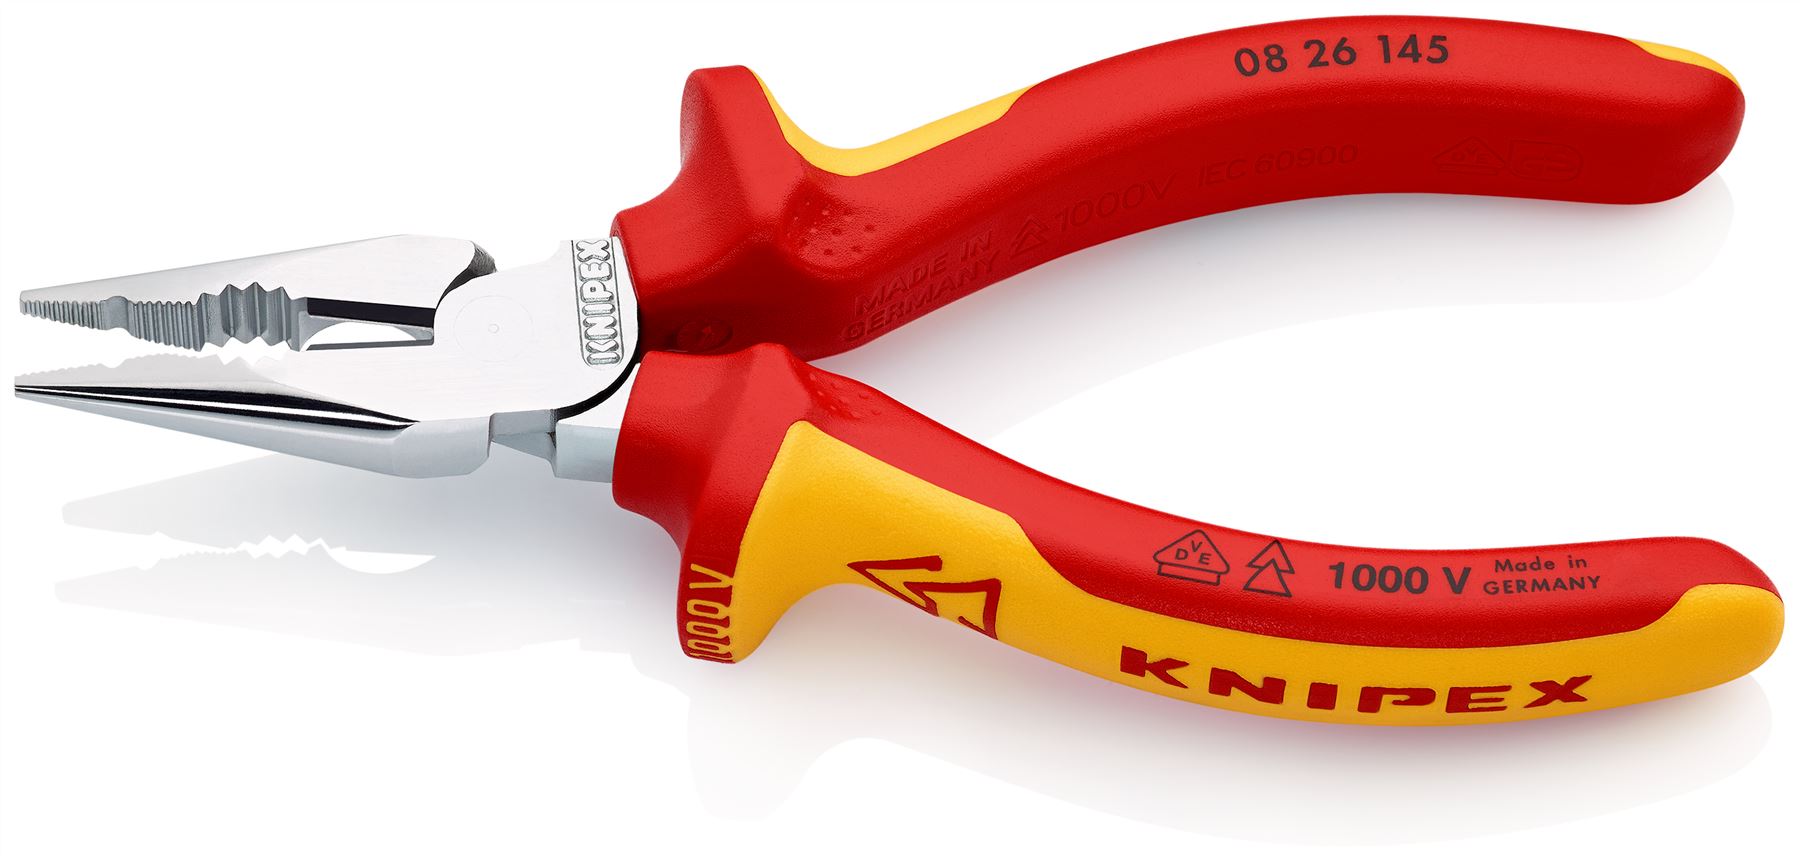 KNIPEX Needle Nose Combination Pliers 145mm VDE Chrome Multi Component Grips 08 26 145